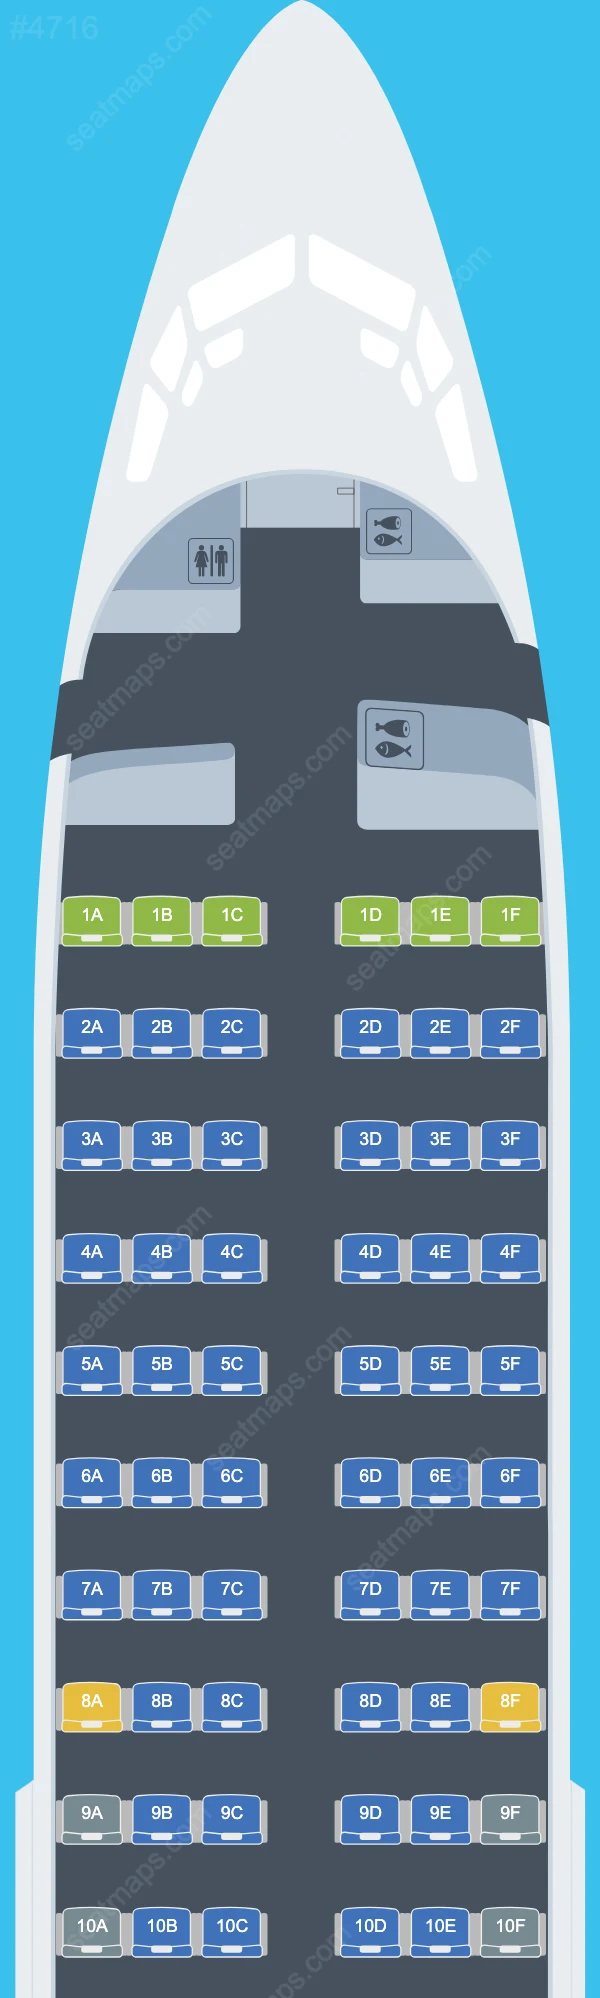 SCAT Airlines Boeing 737 Seat Maps 737-300